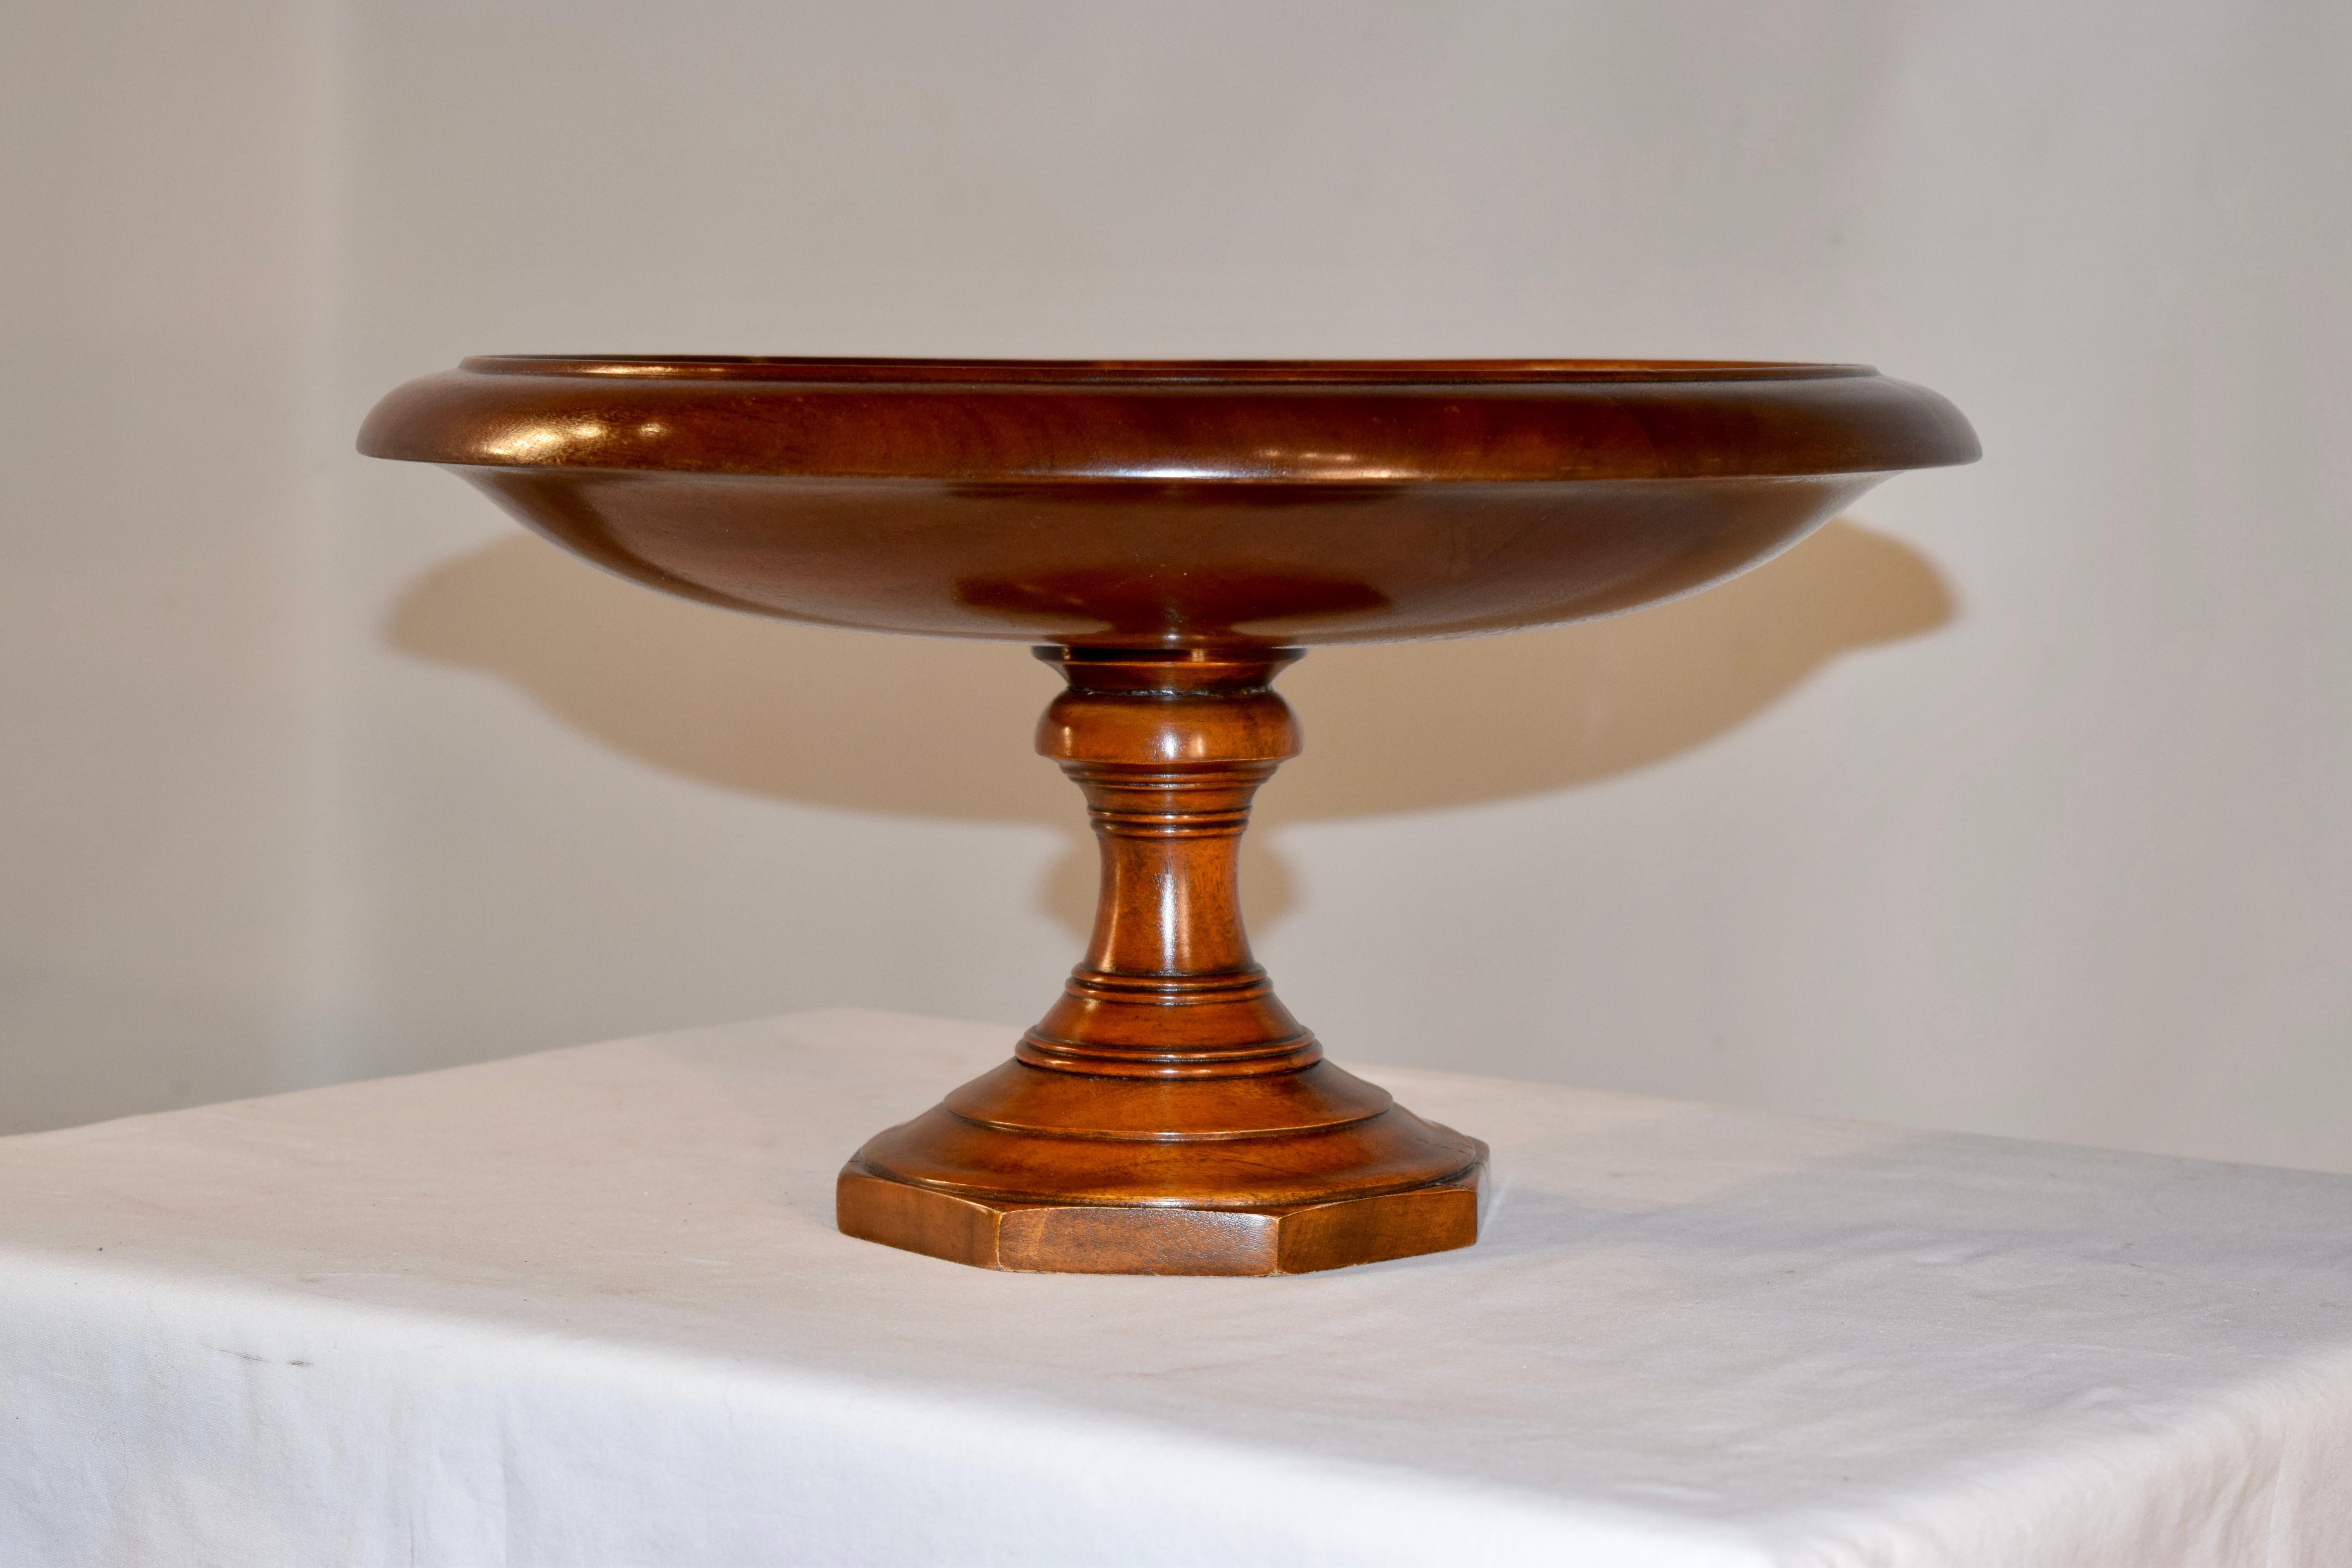 English footed large bowl made from mahogany, circa 1900. The bowl is nicely hand-turned and is supported on a turned pedestal with an octagonal shaped base.